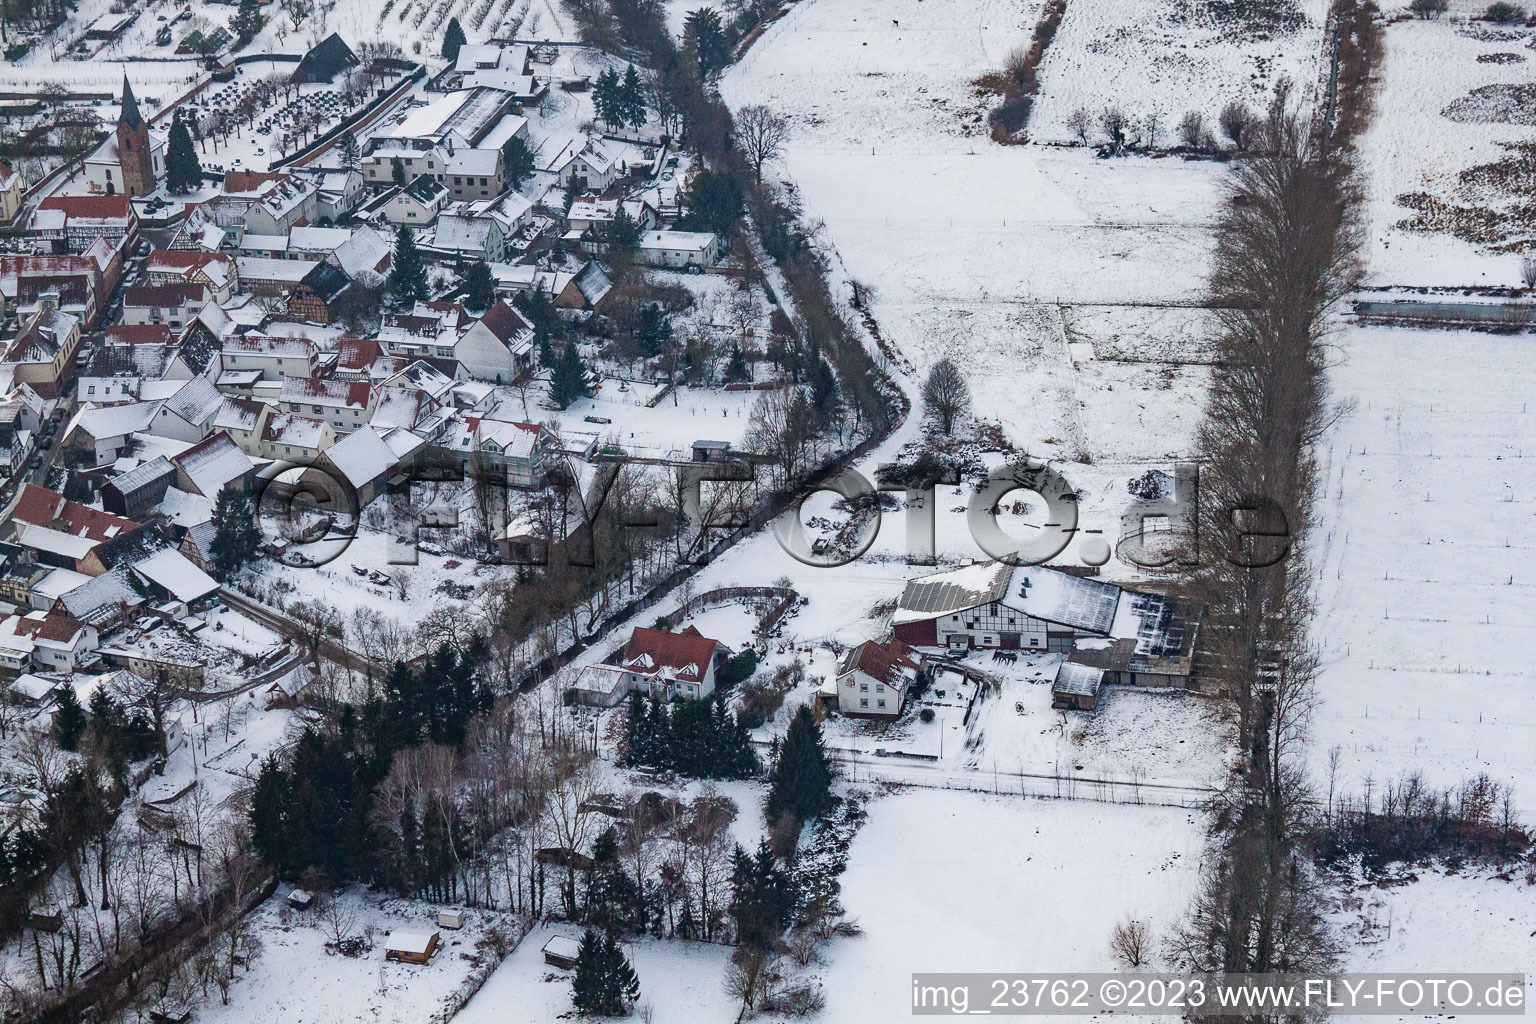 Aerial view of Winden in the state Rhineland-Palatinate, Germany